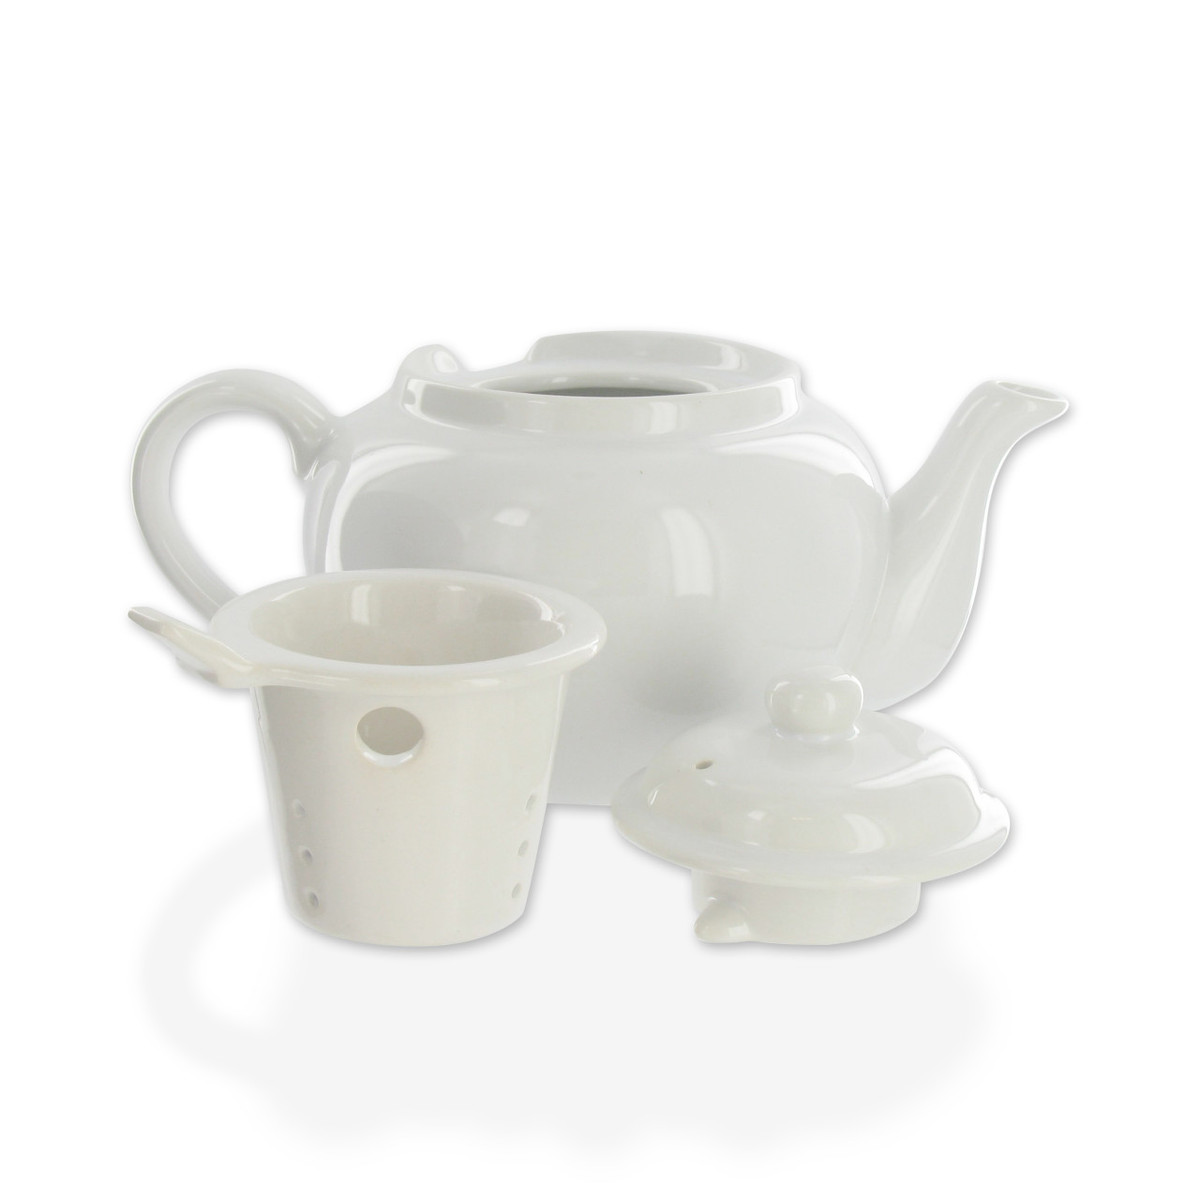 Amsterdam 2 Cup Infuser Teapot - White